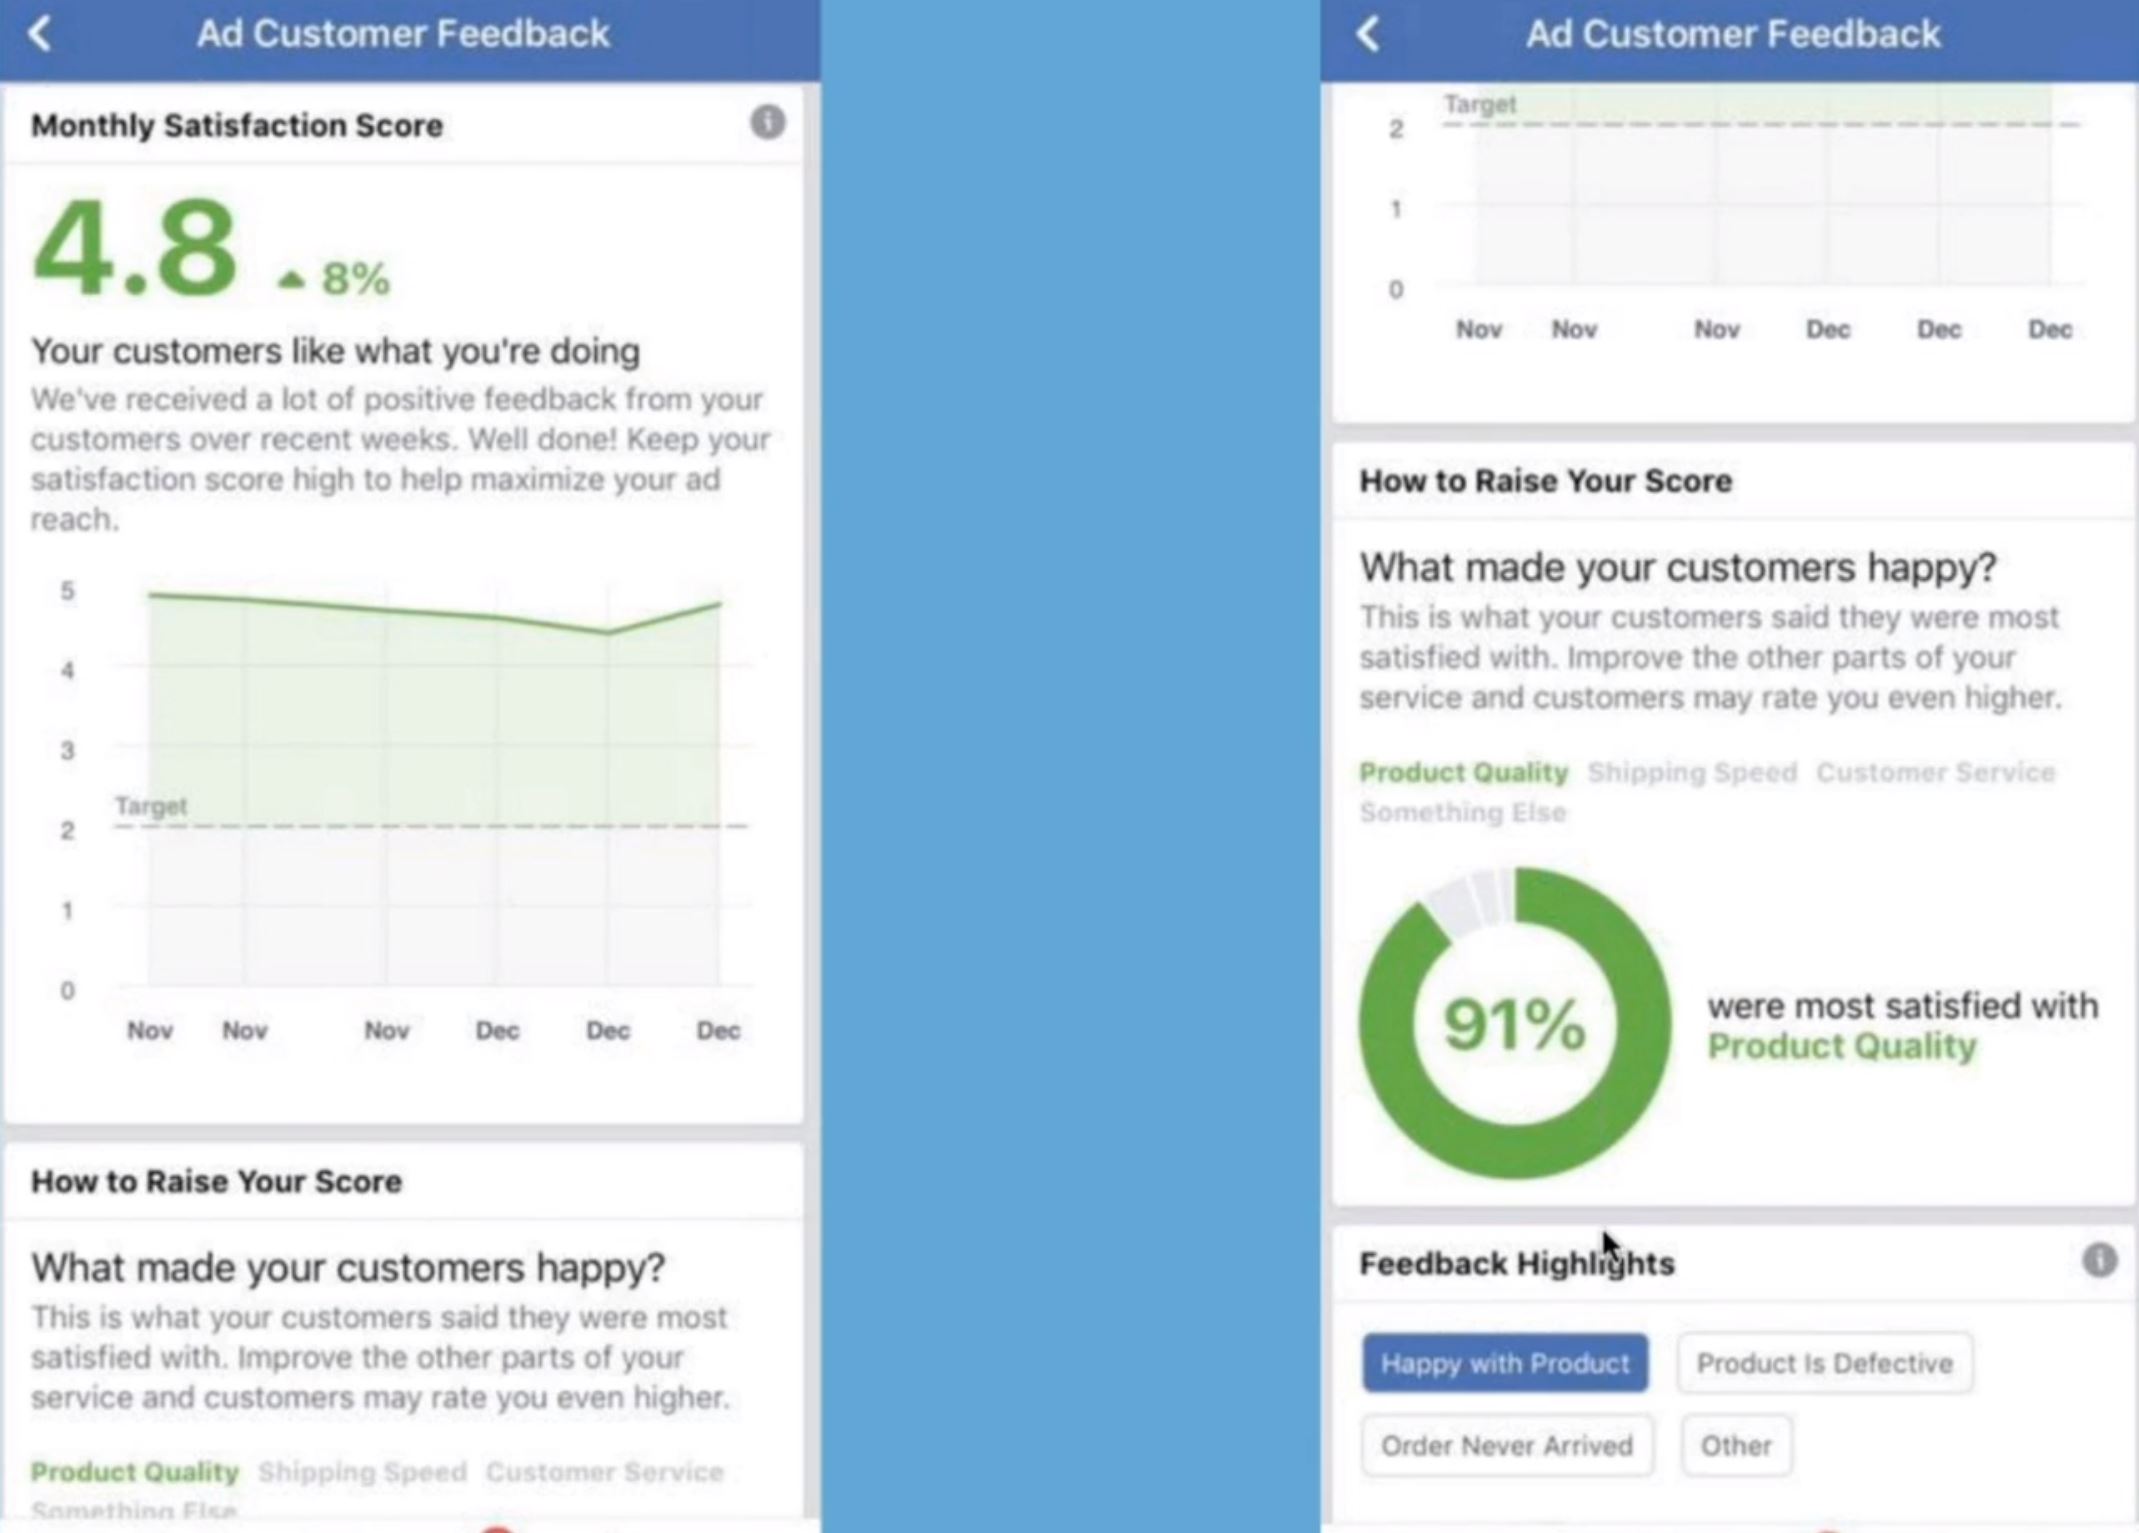 Screenshot of the Business Page view of the Facebook Customer Feedback Score that shows a pie chart, a bar graph, and descriptions about how to raise your score